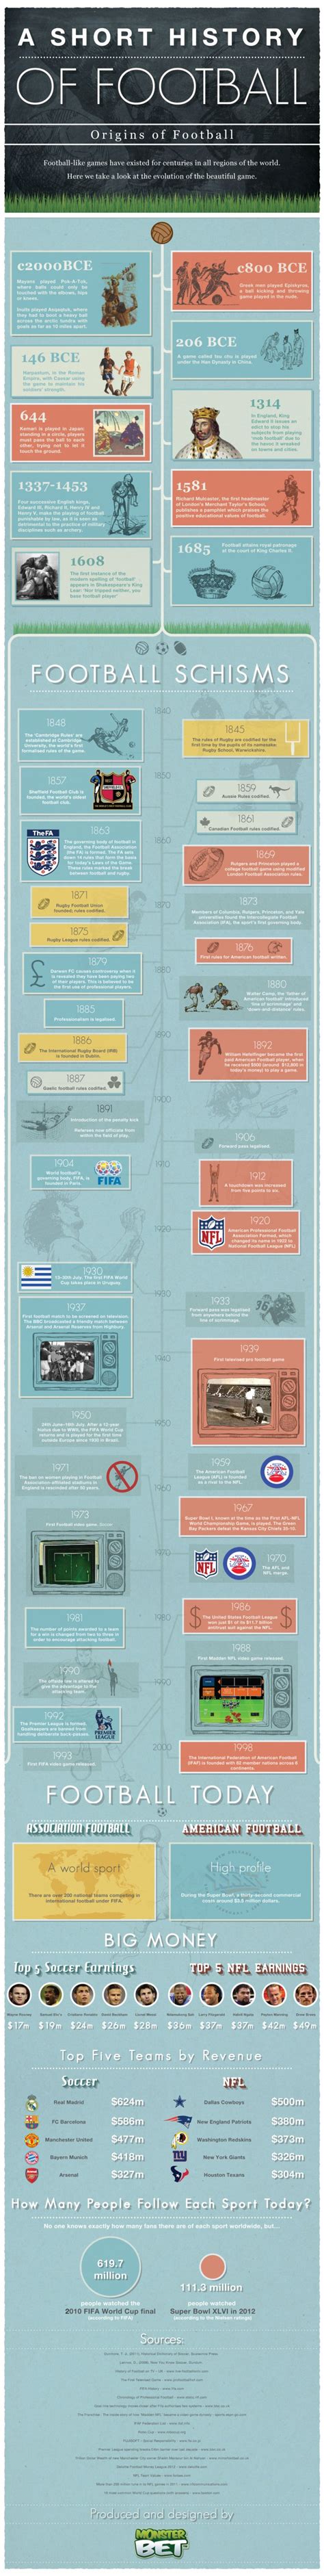 A Brief History Of Football Infographic Business2community